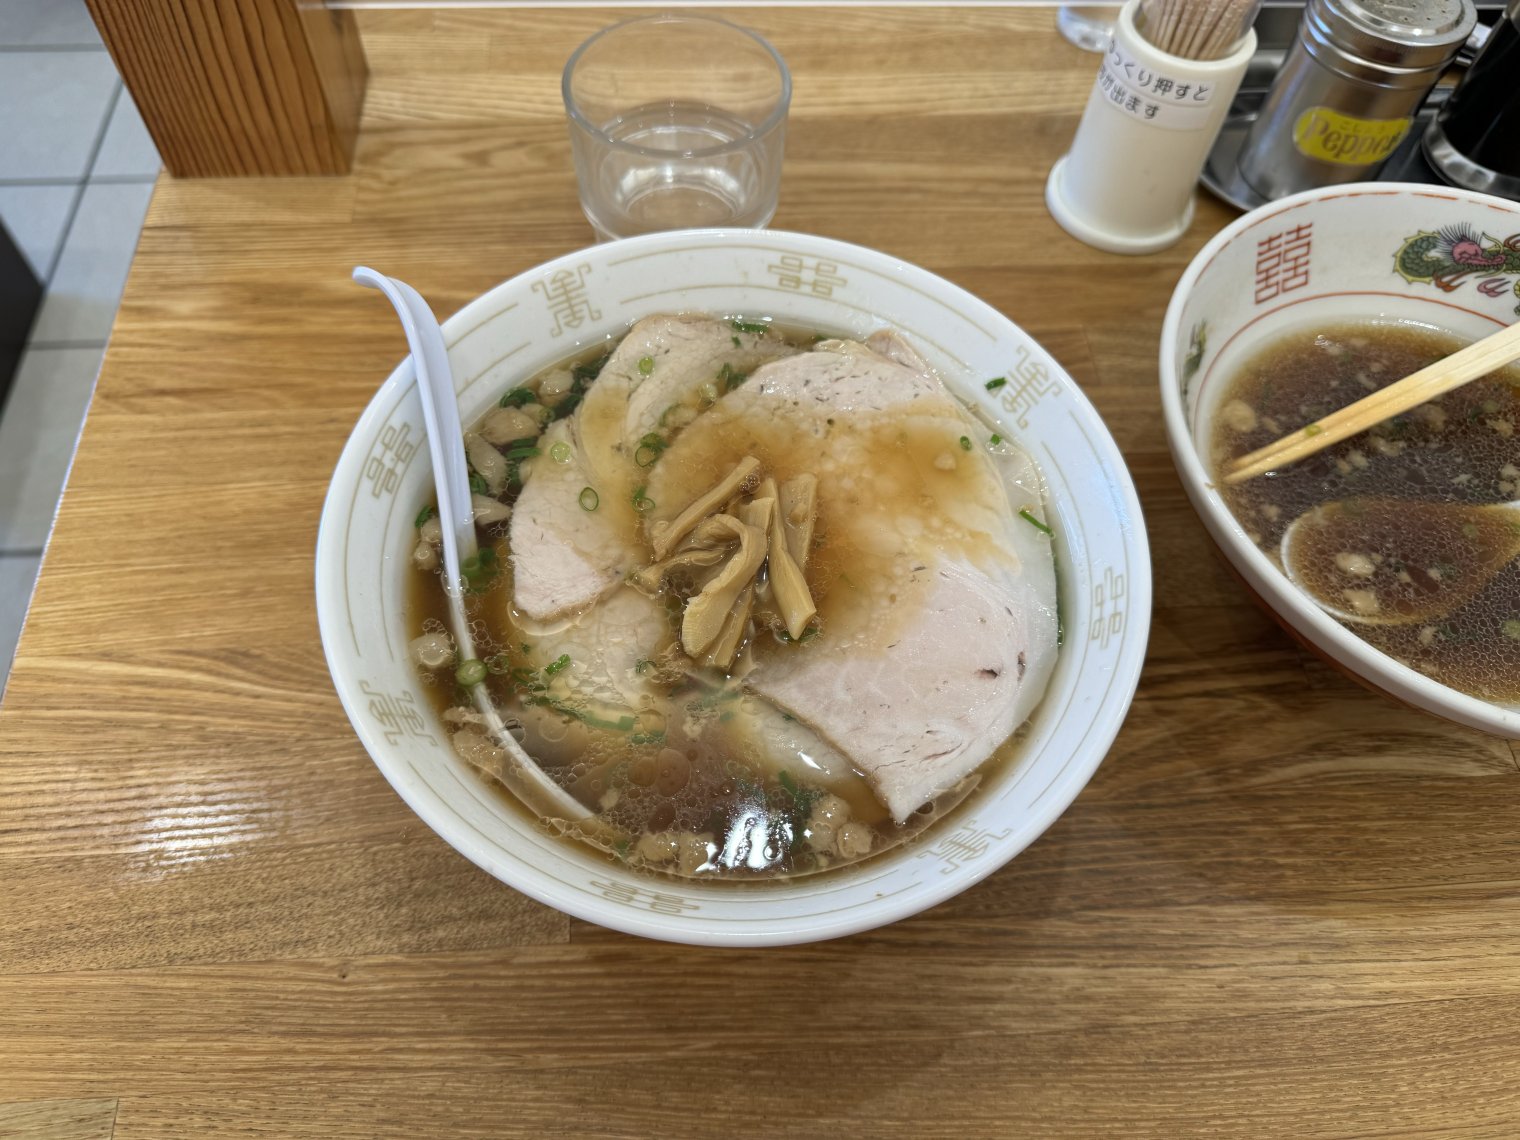 A full bowl of shouyu ramen next to a mostly consumed one in Onomichi